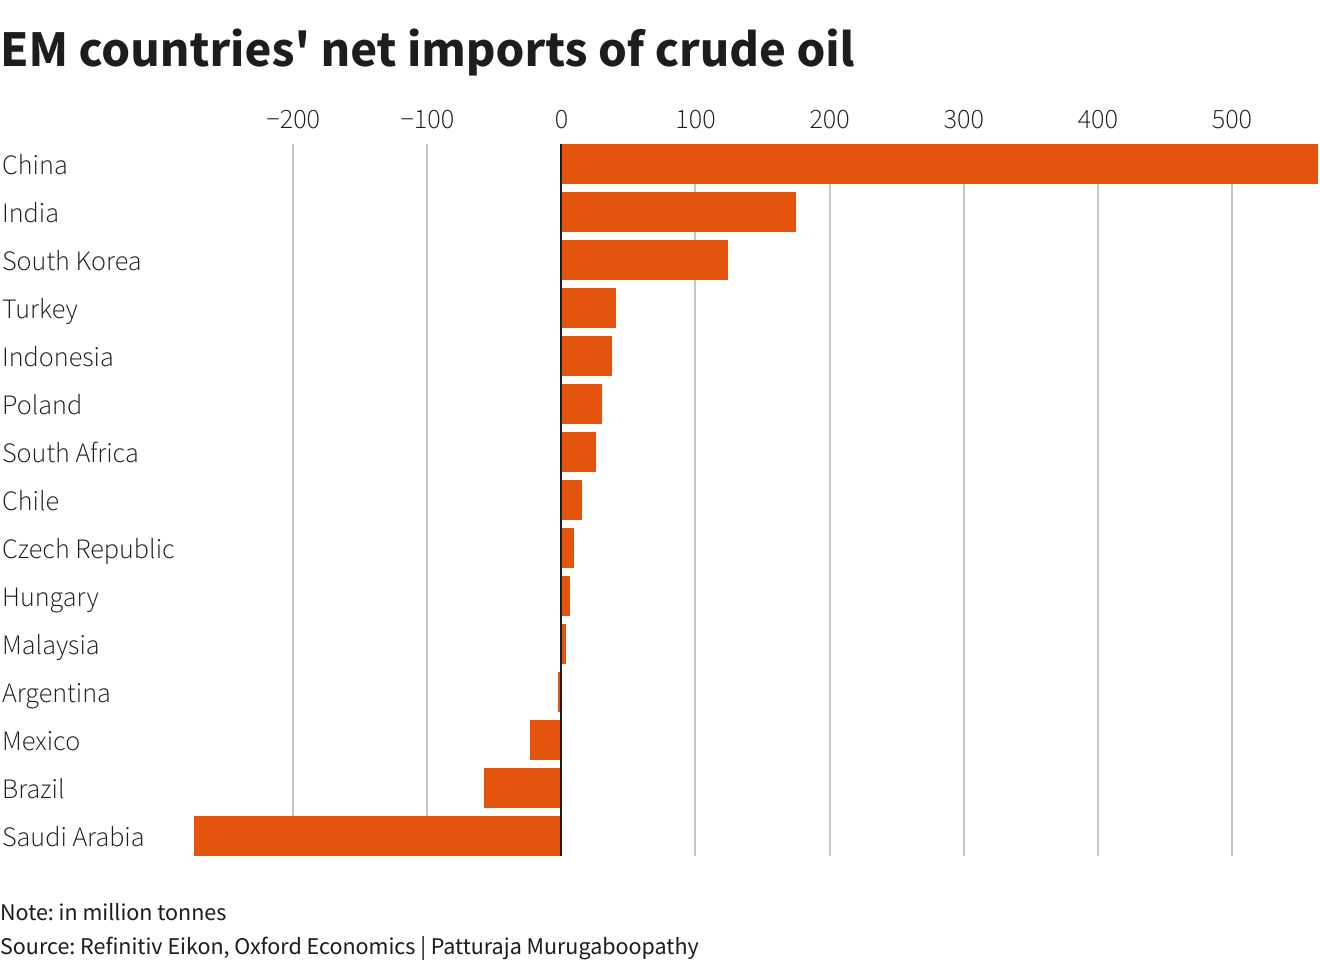 EM countries' net imports of crude oil